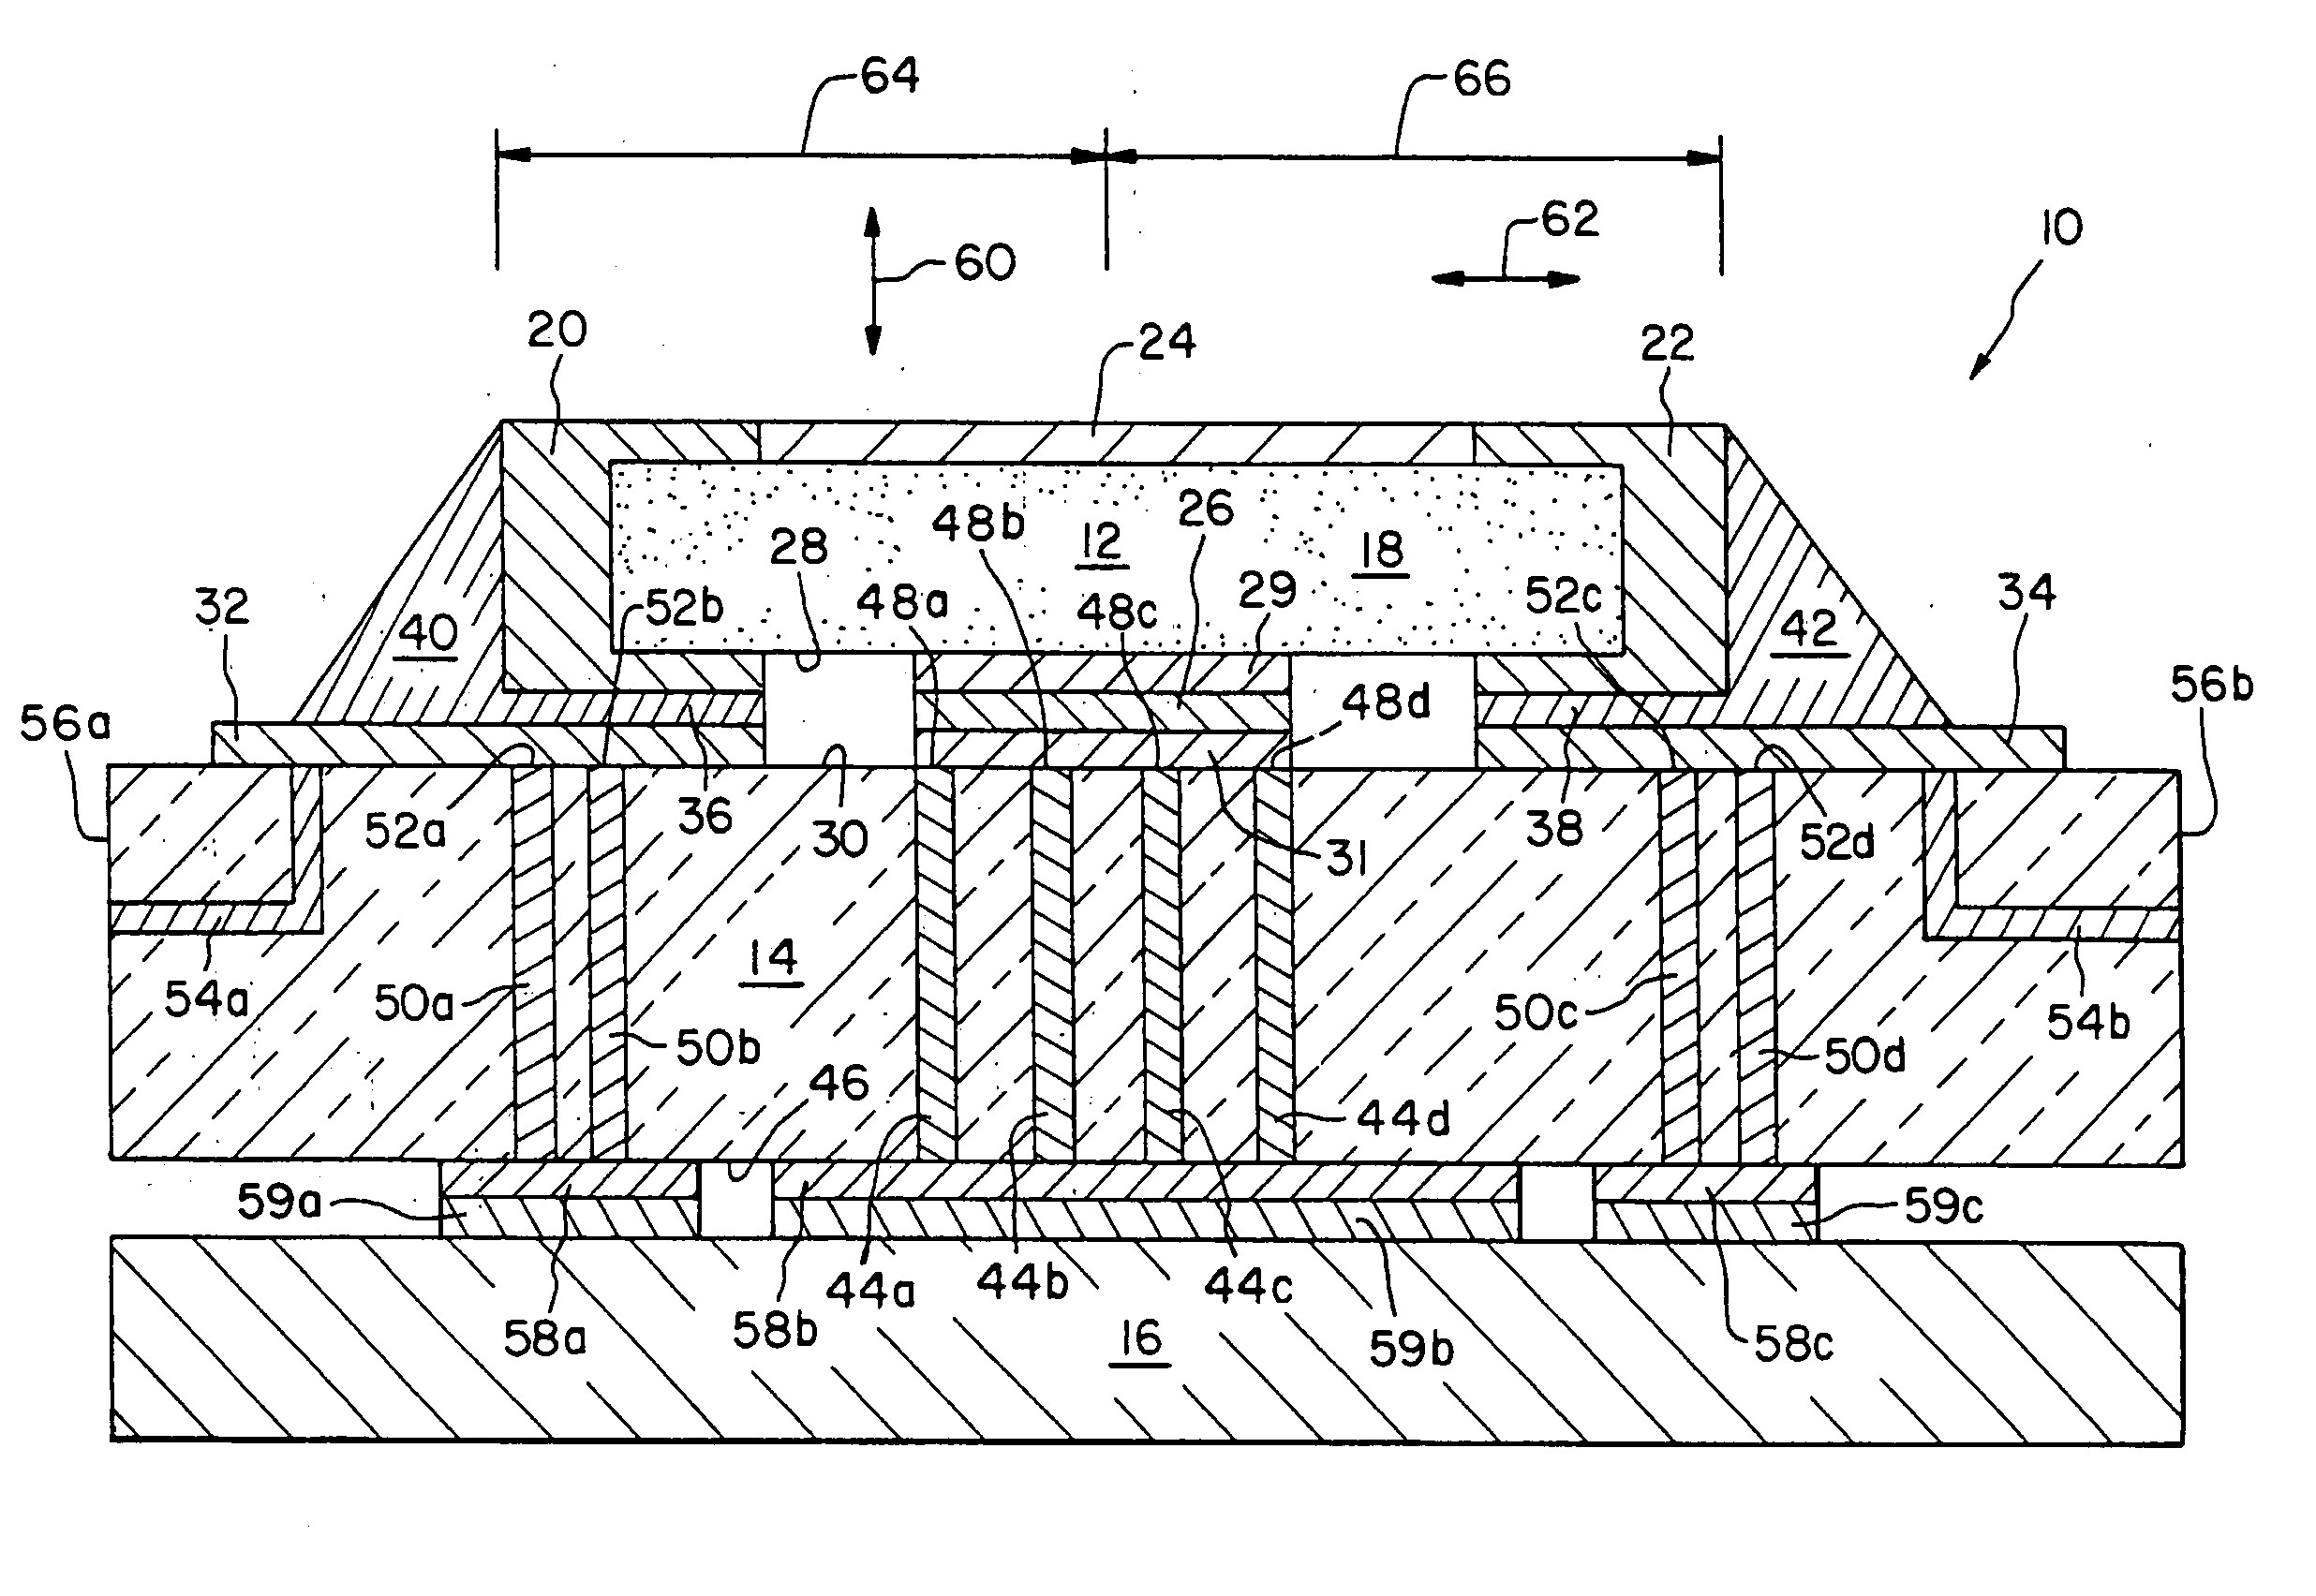 Discrete electronic component arrangement including anchoring, thermally conductive pad